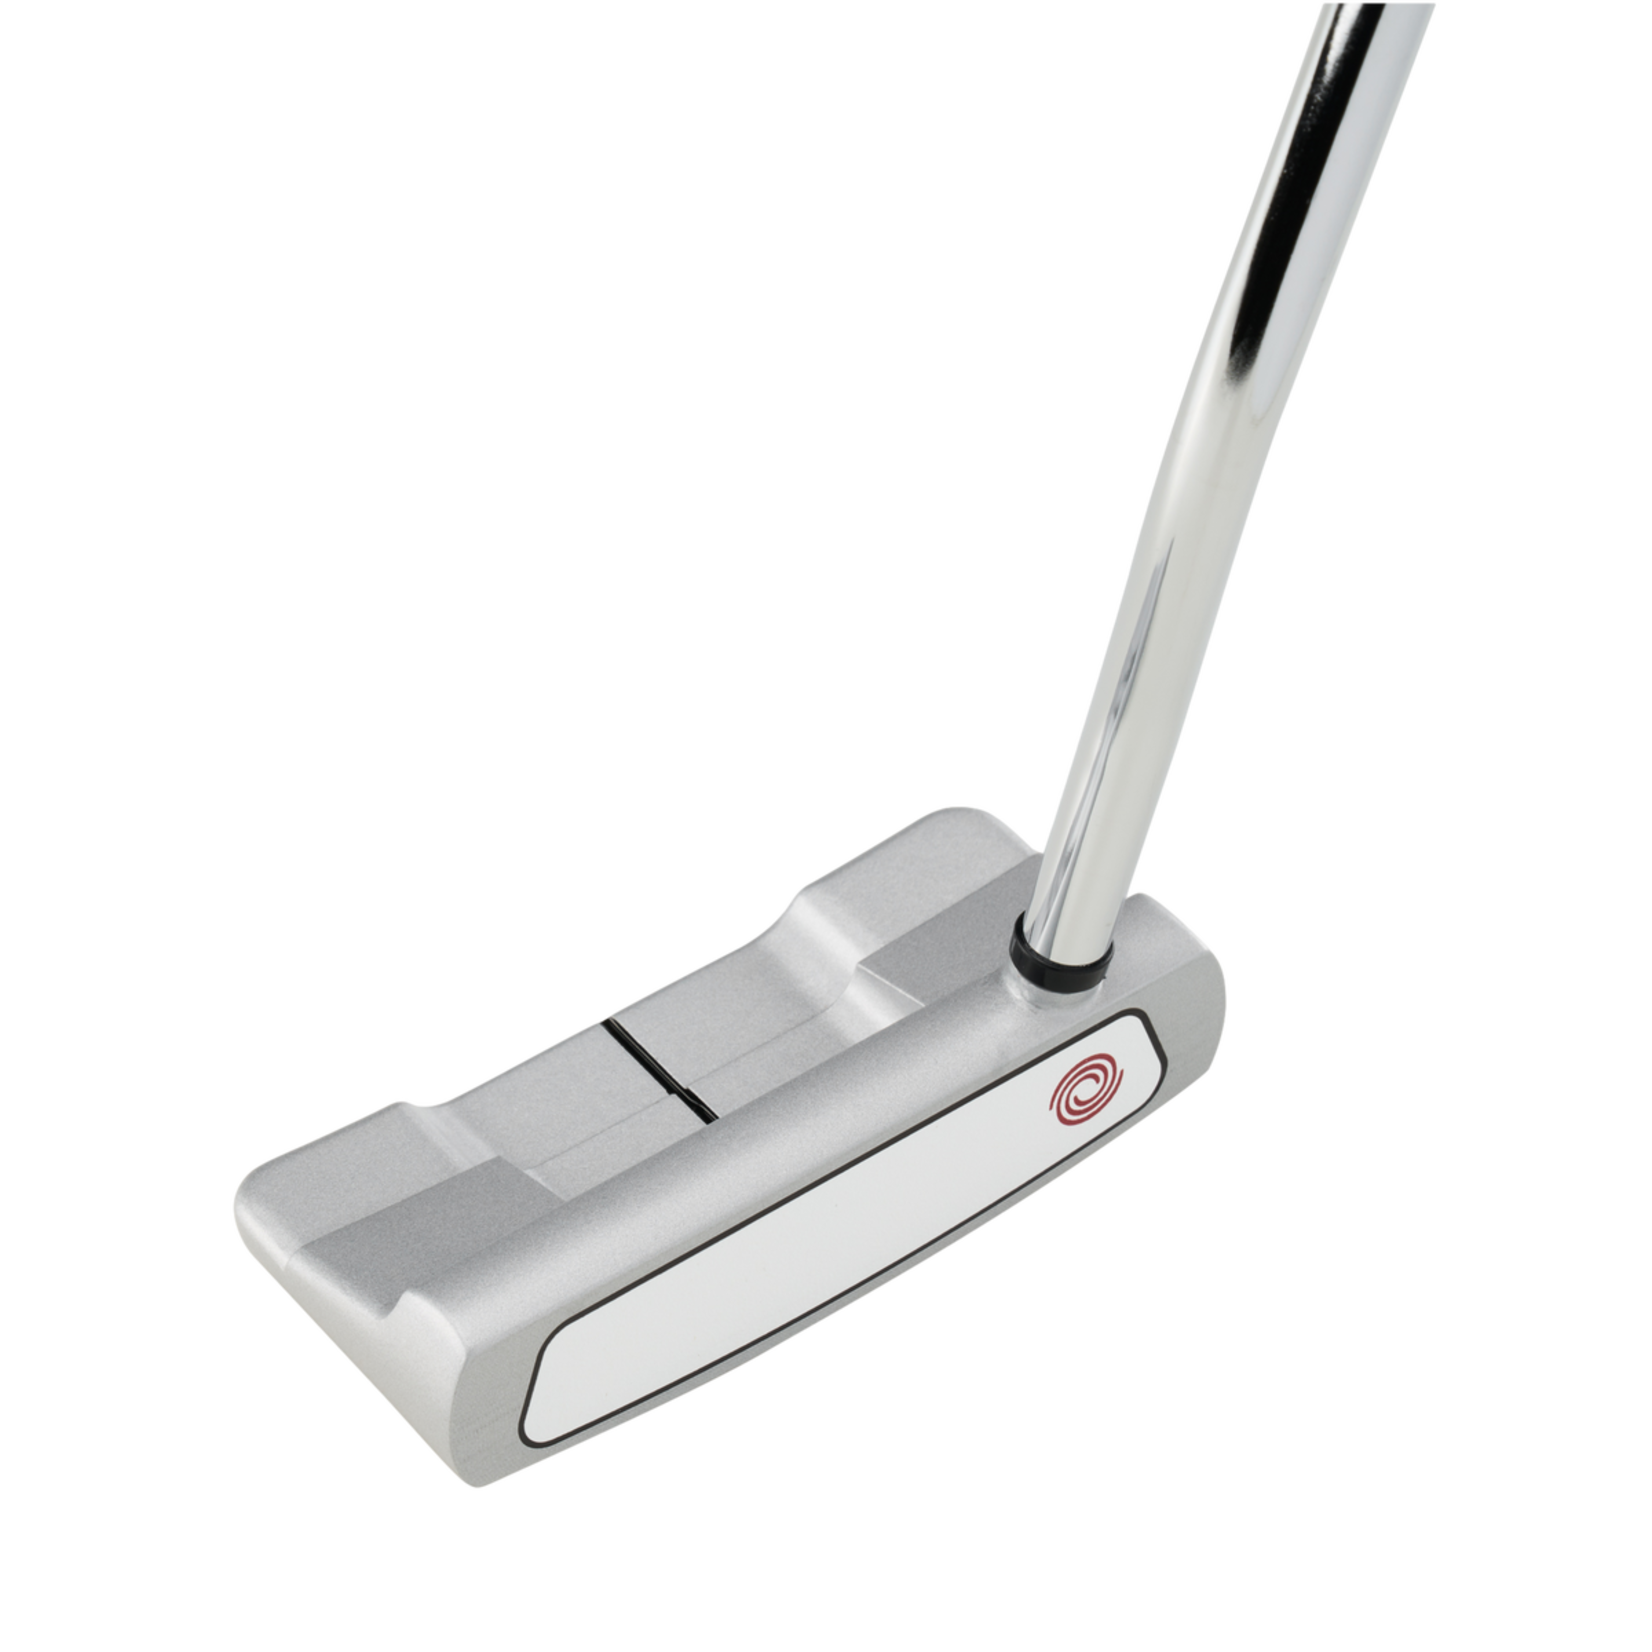 ODYSSEY White Hot OG Double Wide DB Putter